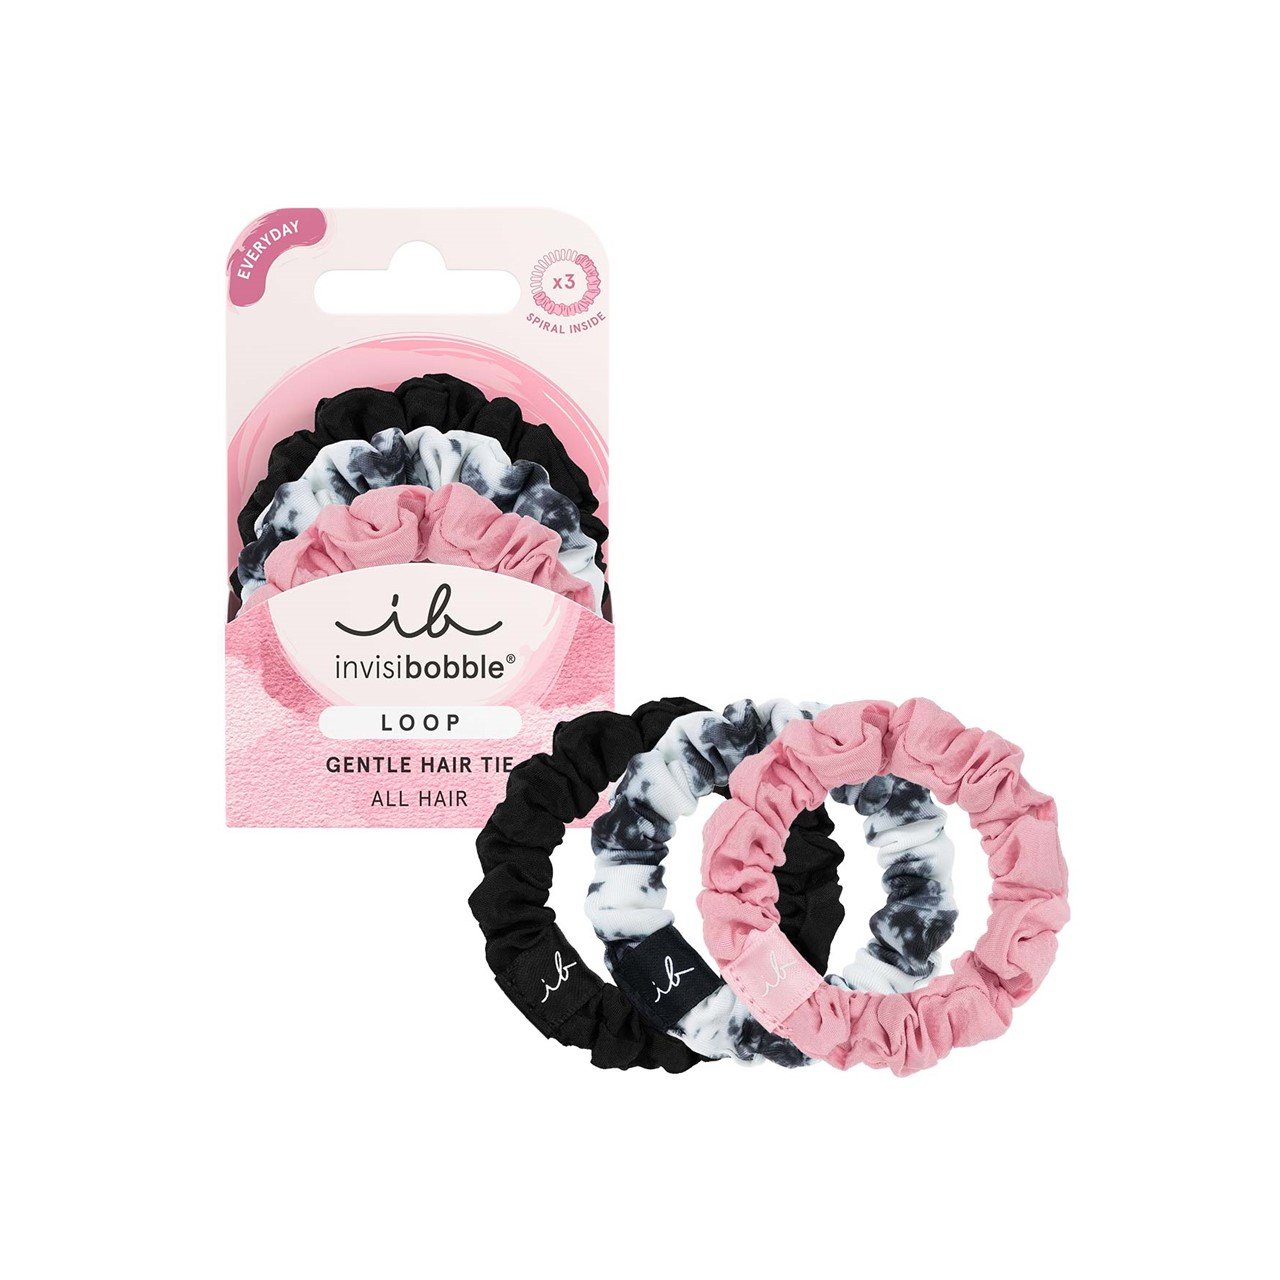 https://static.beautytocare.com/media/catalog/product/i/n/invisibobble-loop-be-gentle-hair-tie-x3.jpg